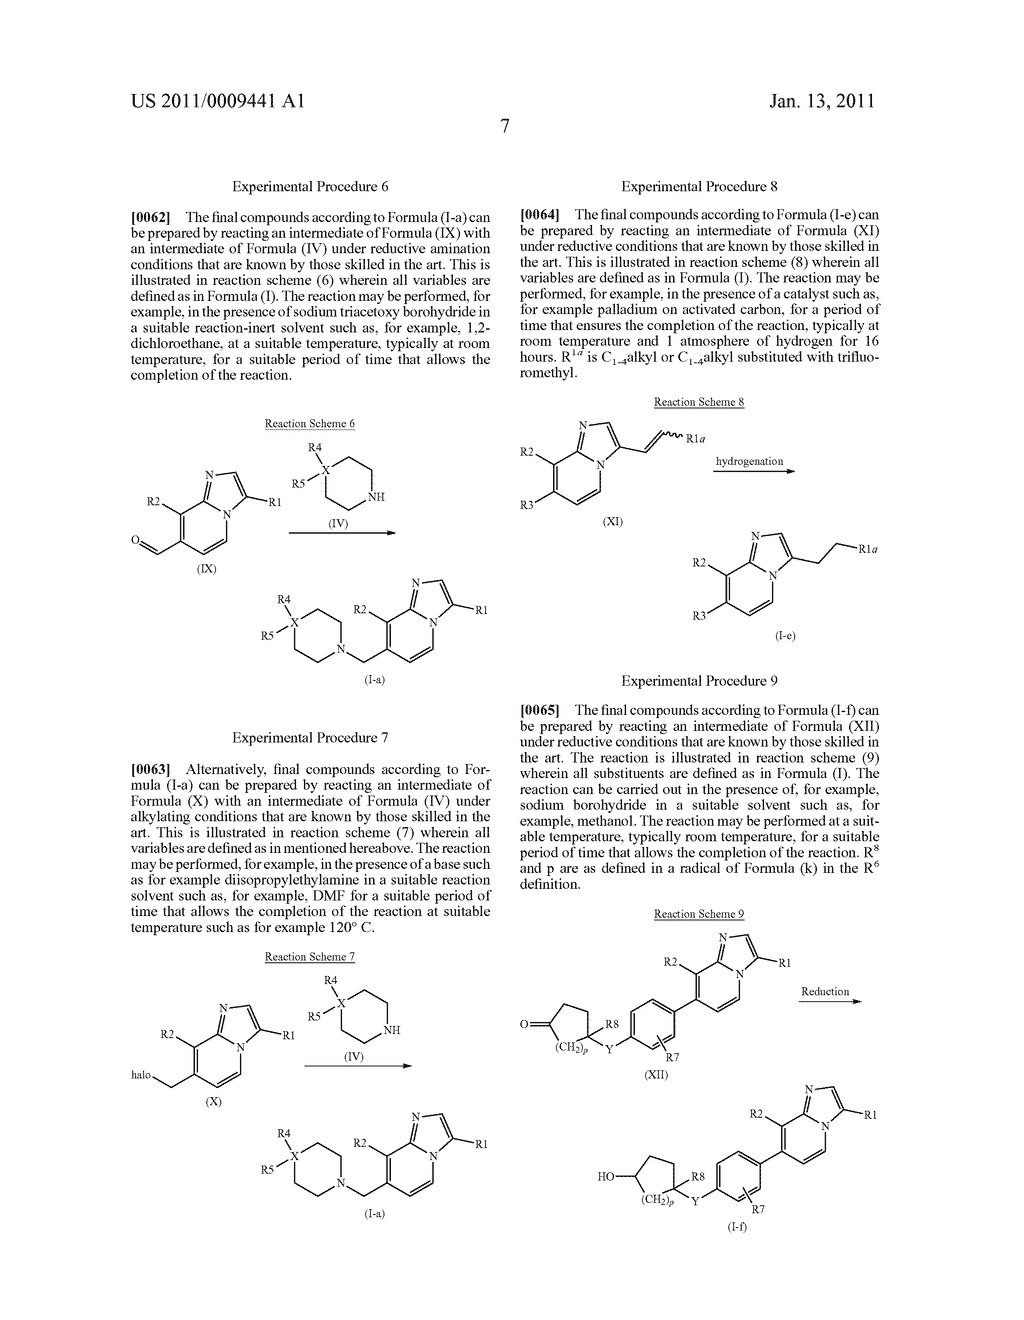 IMIDAZO[1,2-A]PYRIDINE DERIVATIVES AND THEIR USE AS POSITIVE ALLOSTERIC MODULATORS OF MGLUR2 RECEPTORS - diagram, schematic, and image 08